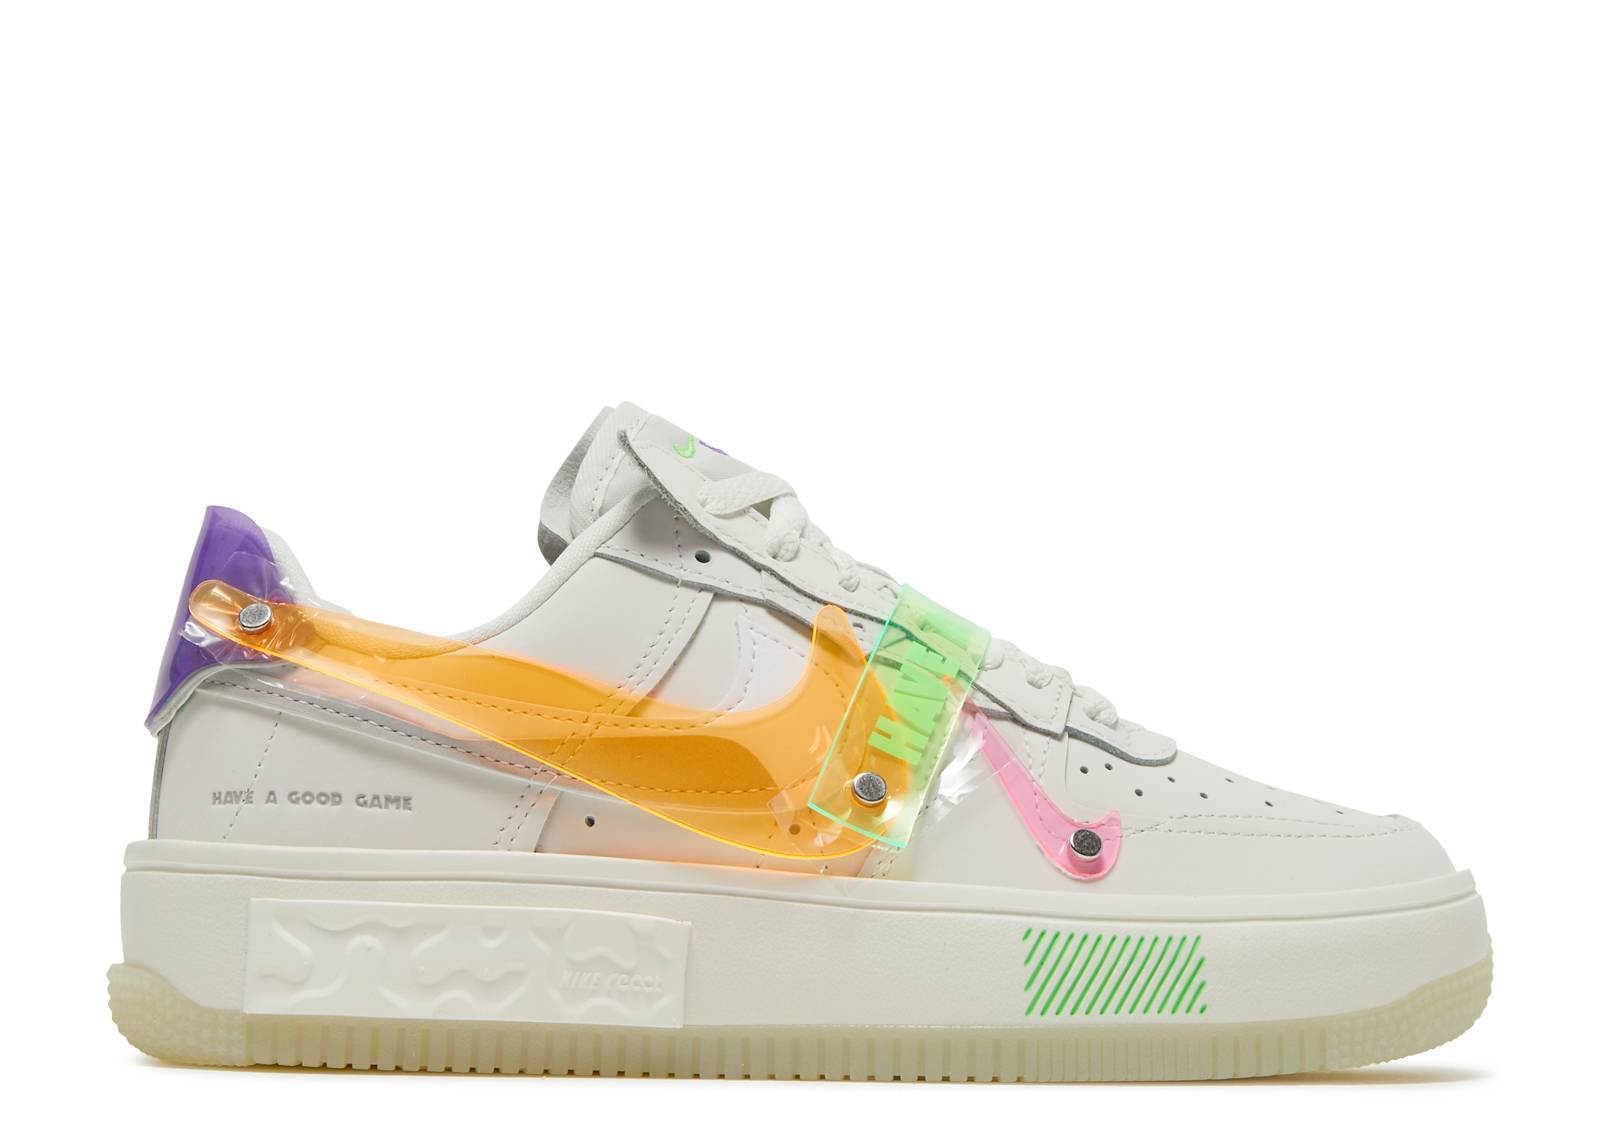 Wmns Air Force 1 Fontanka 'Have A Good Game'